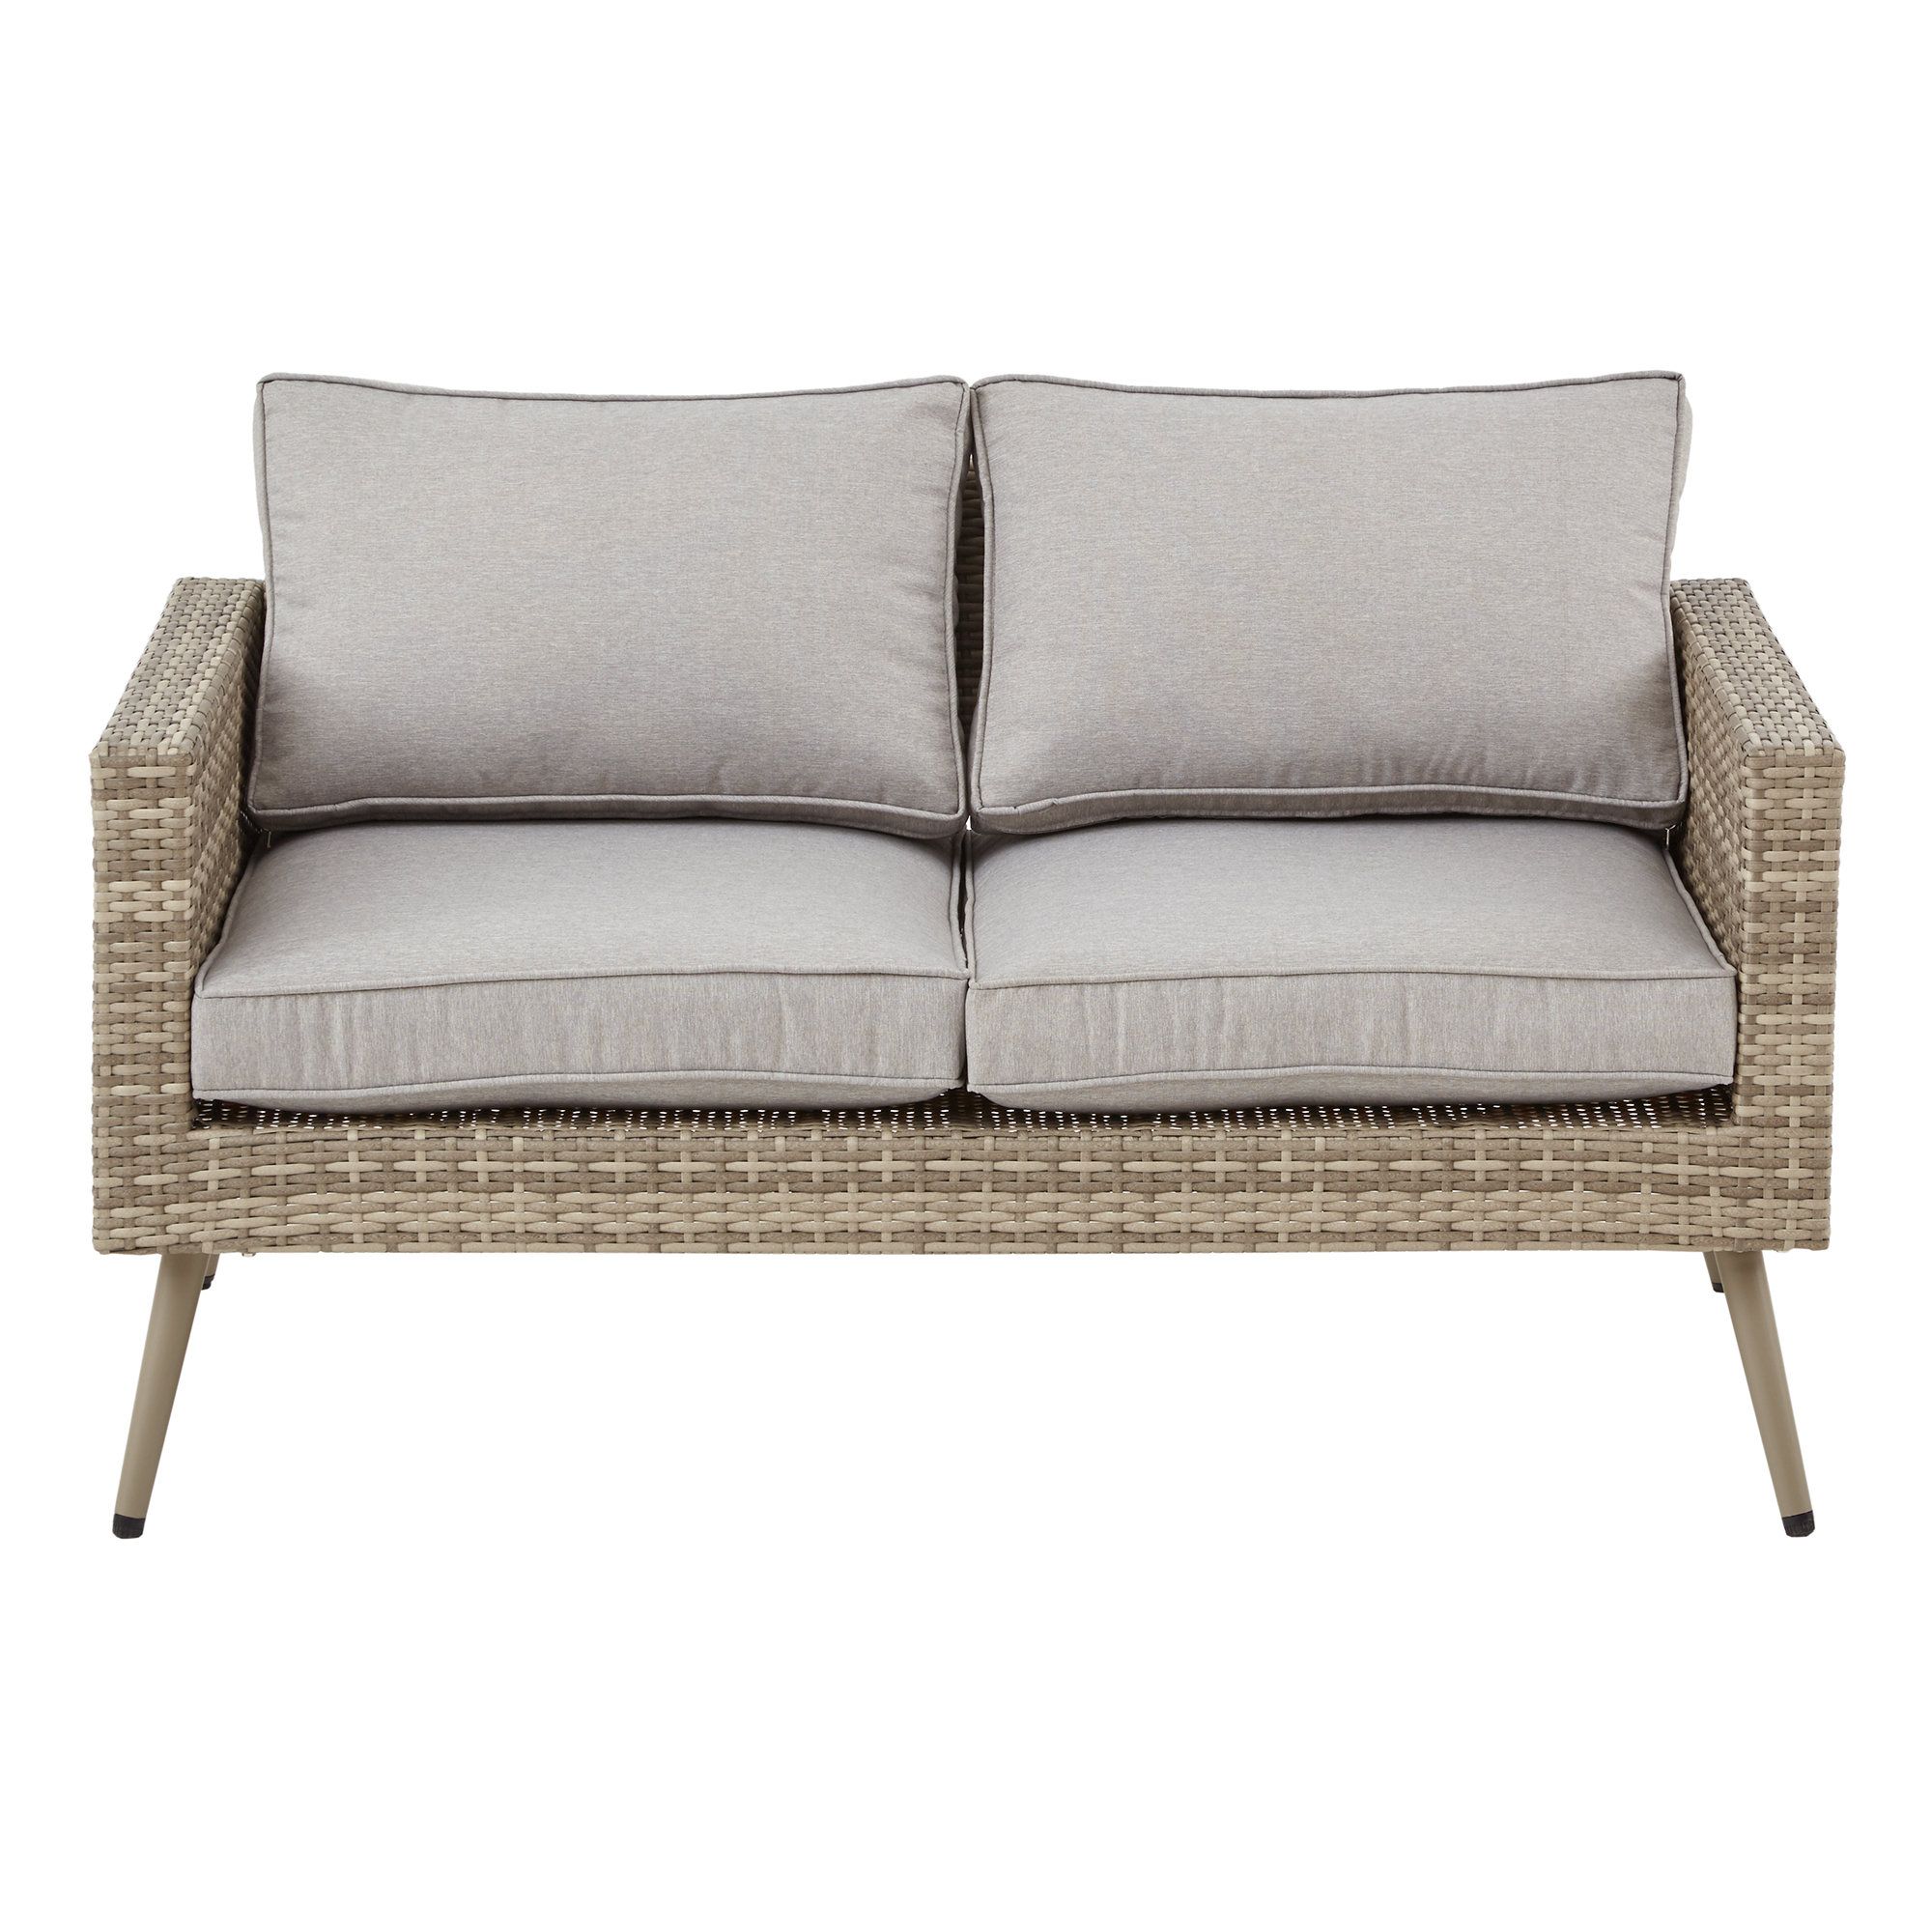 Most Recent Pantano Loveseat With Cushions For Pantano Loveseats With Cushions (Photo 1 of 20)